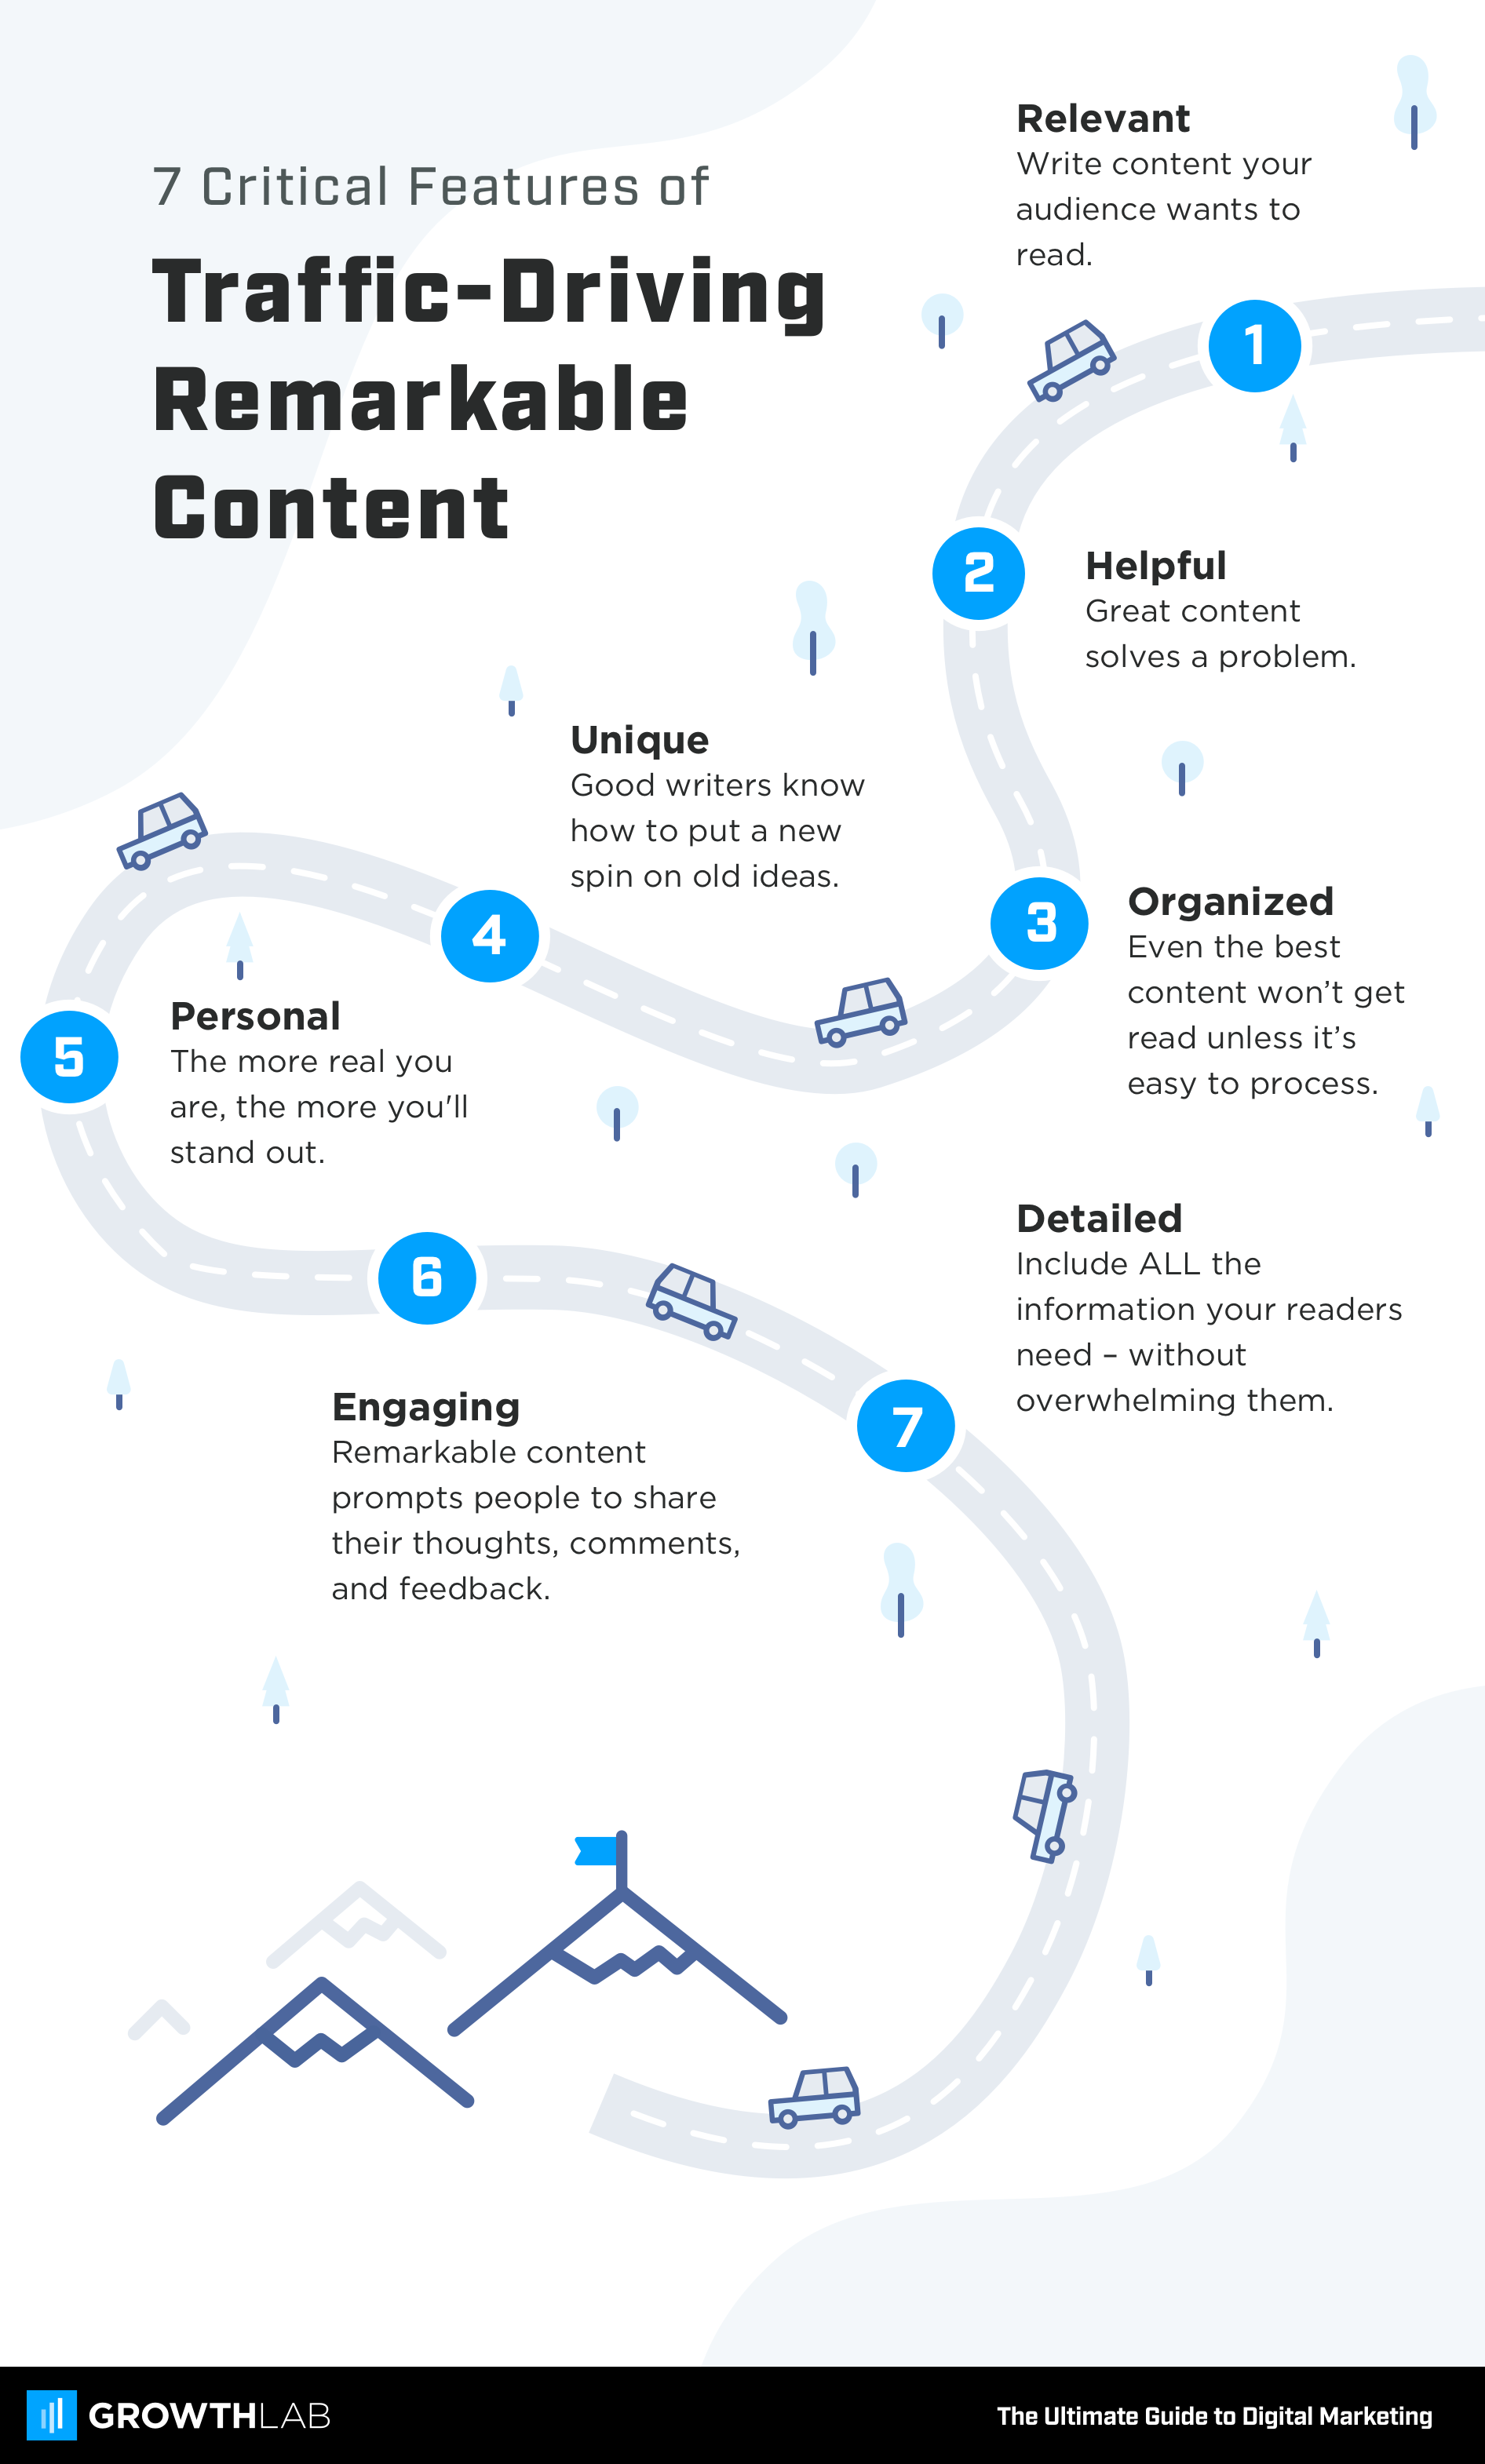 GrowthLab: The 7 Critical Features of Traffic-Driving Remarkable Content